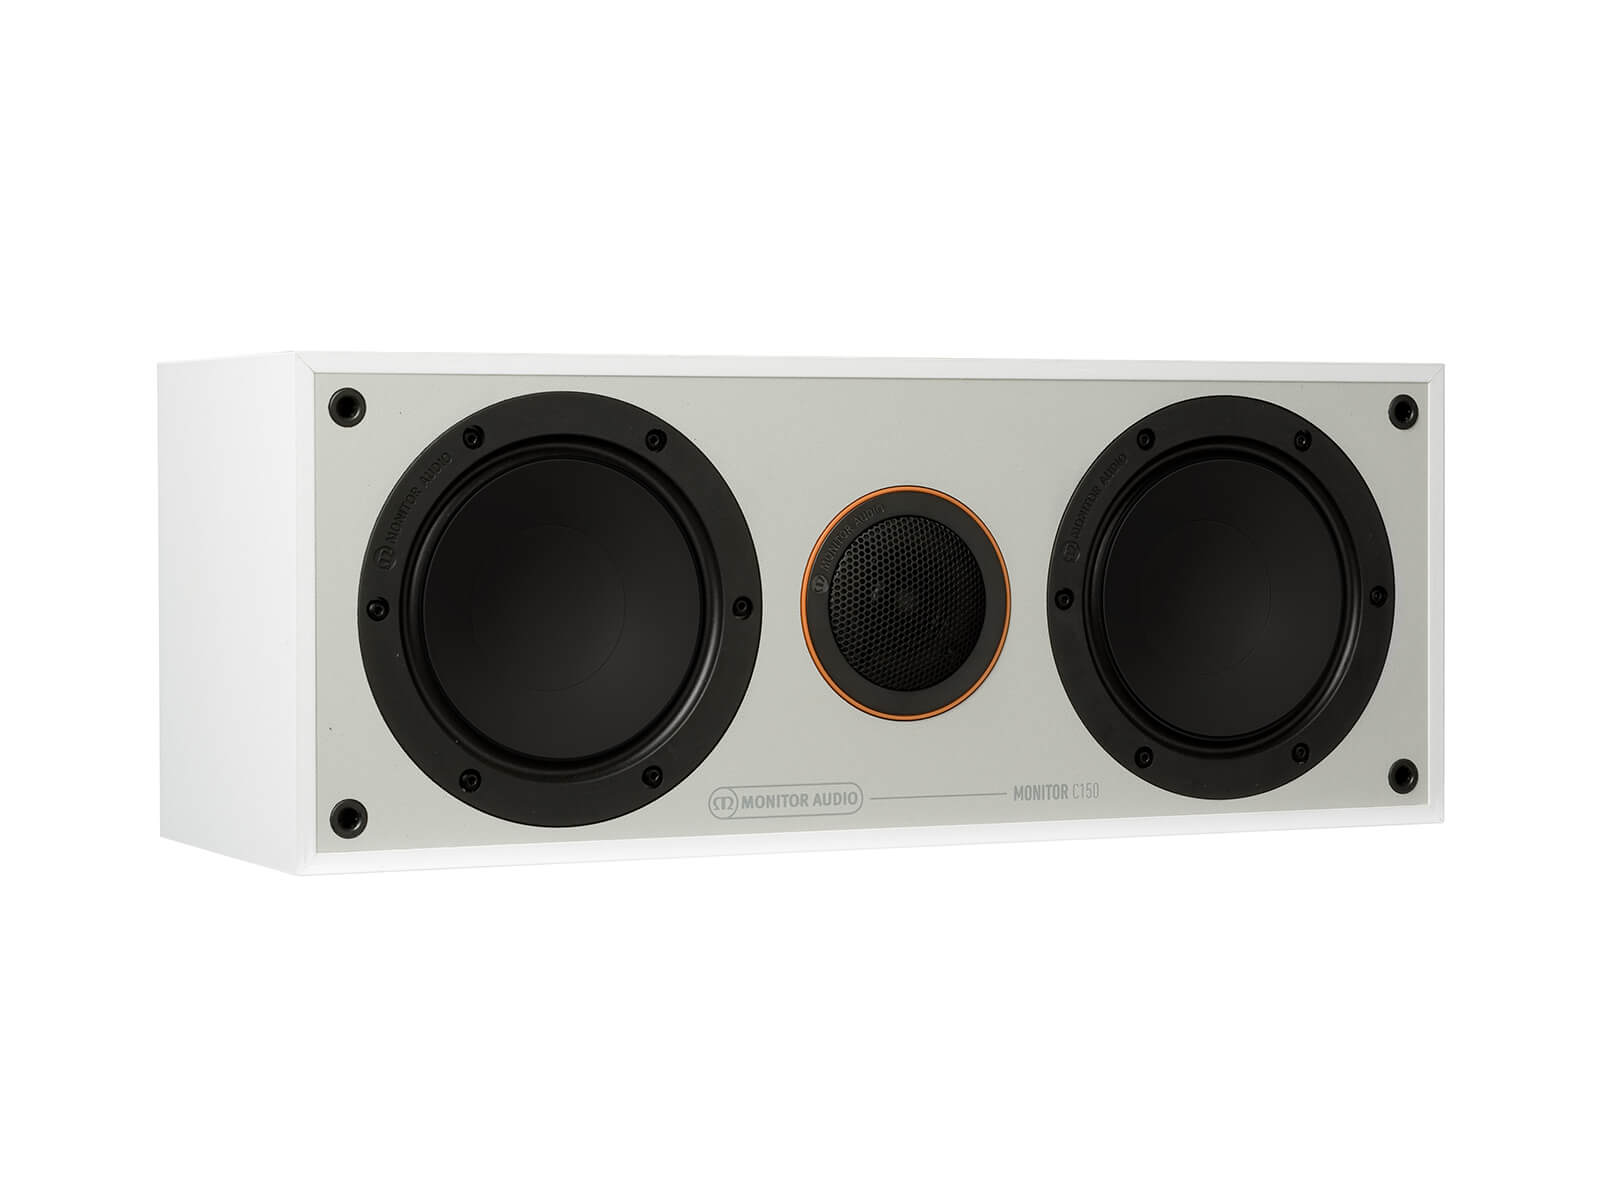 Monitor C150, grille-less centre channel speakers, with a white finish.